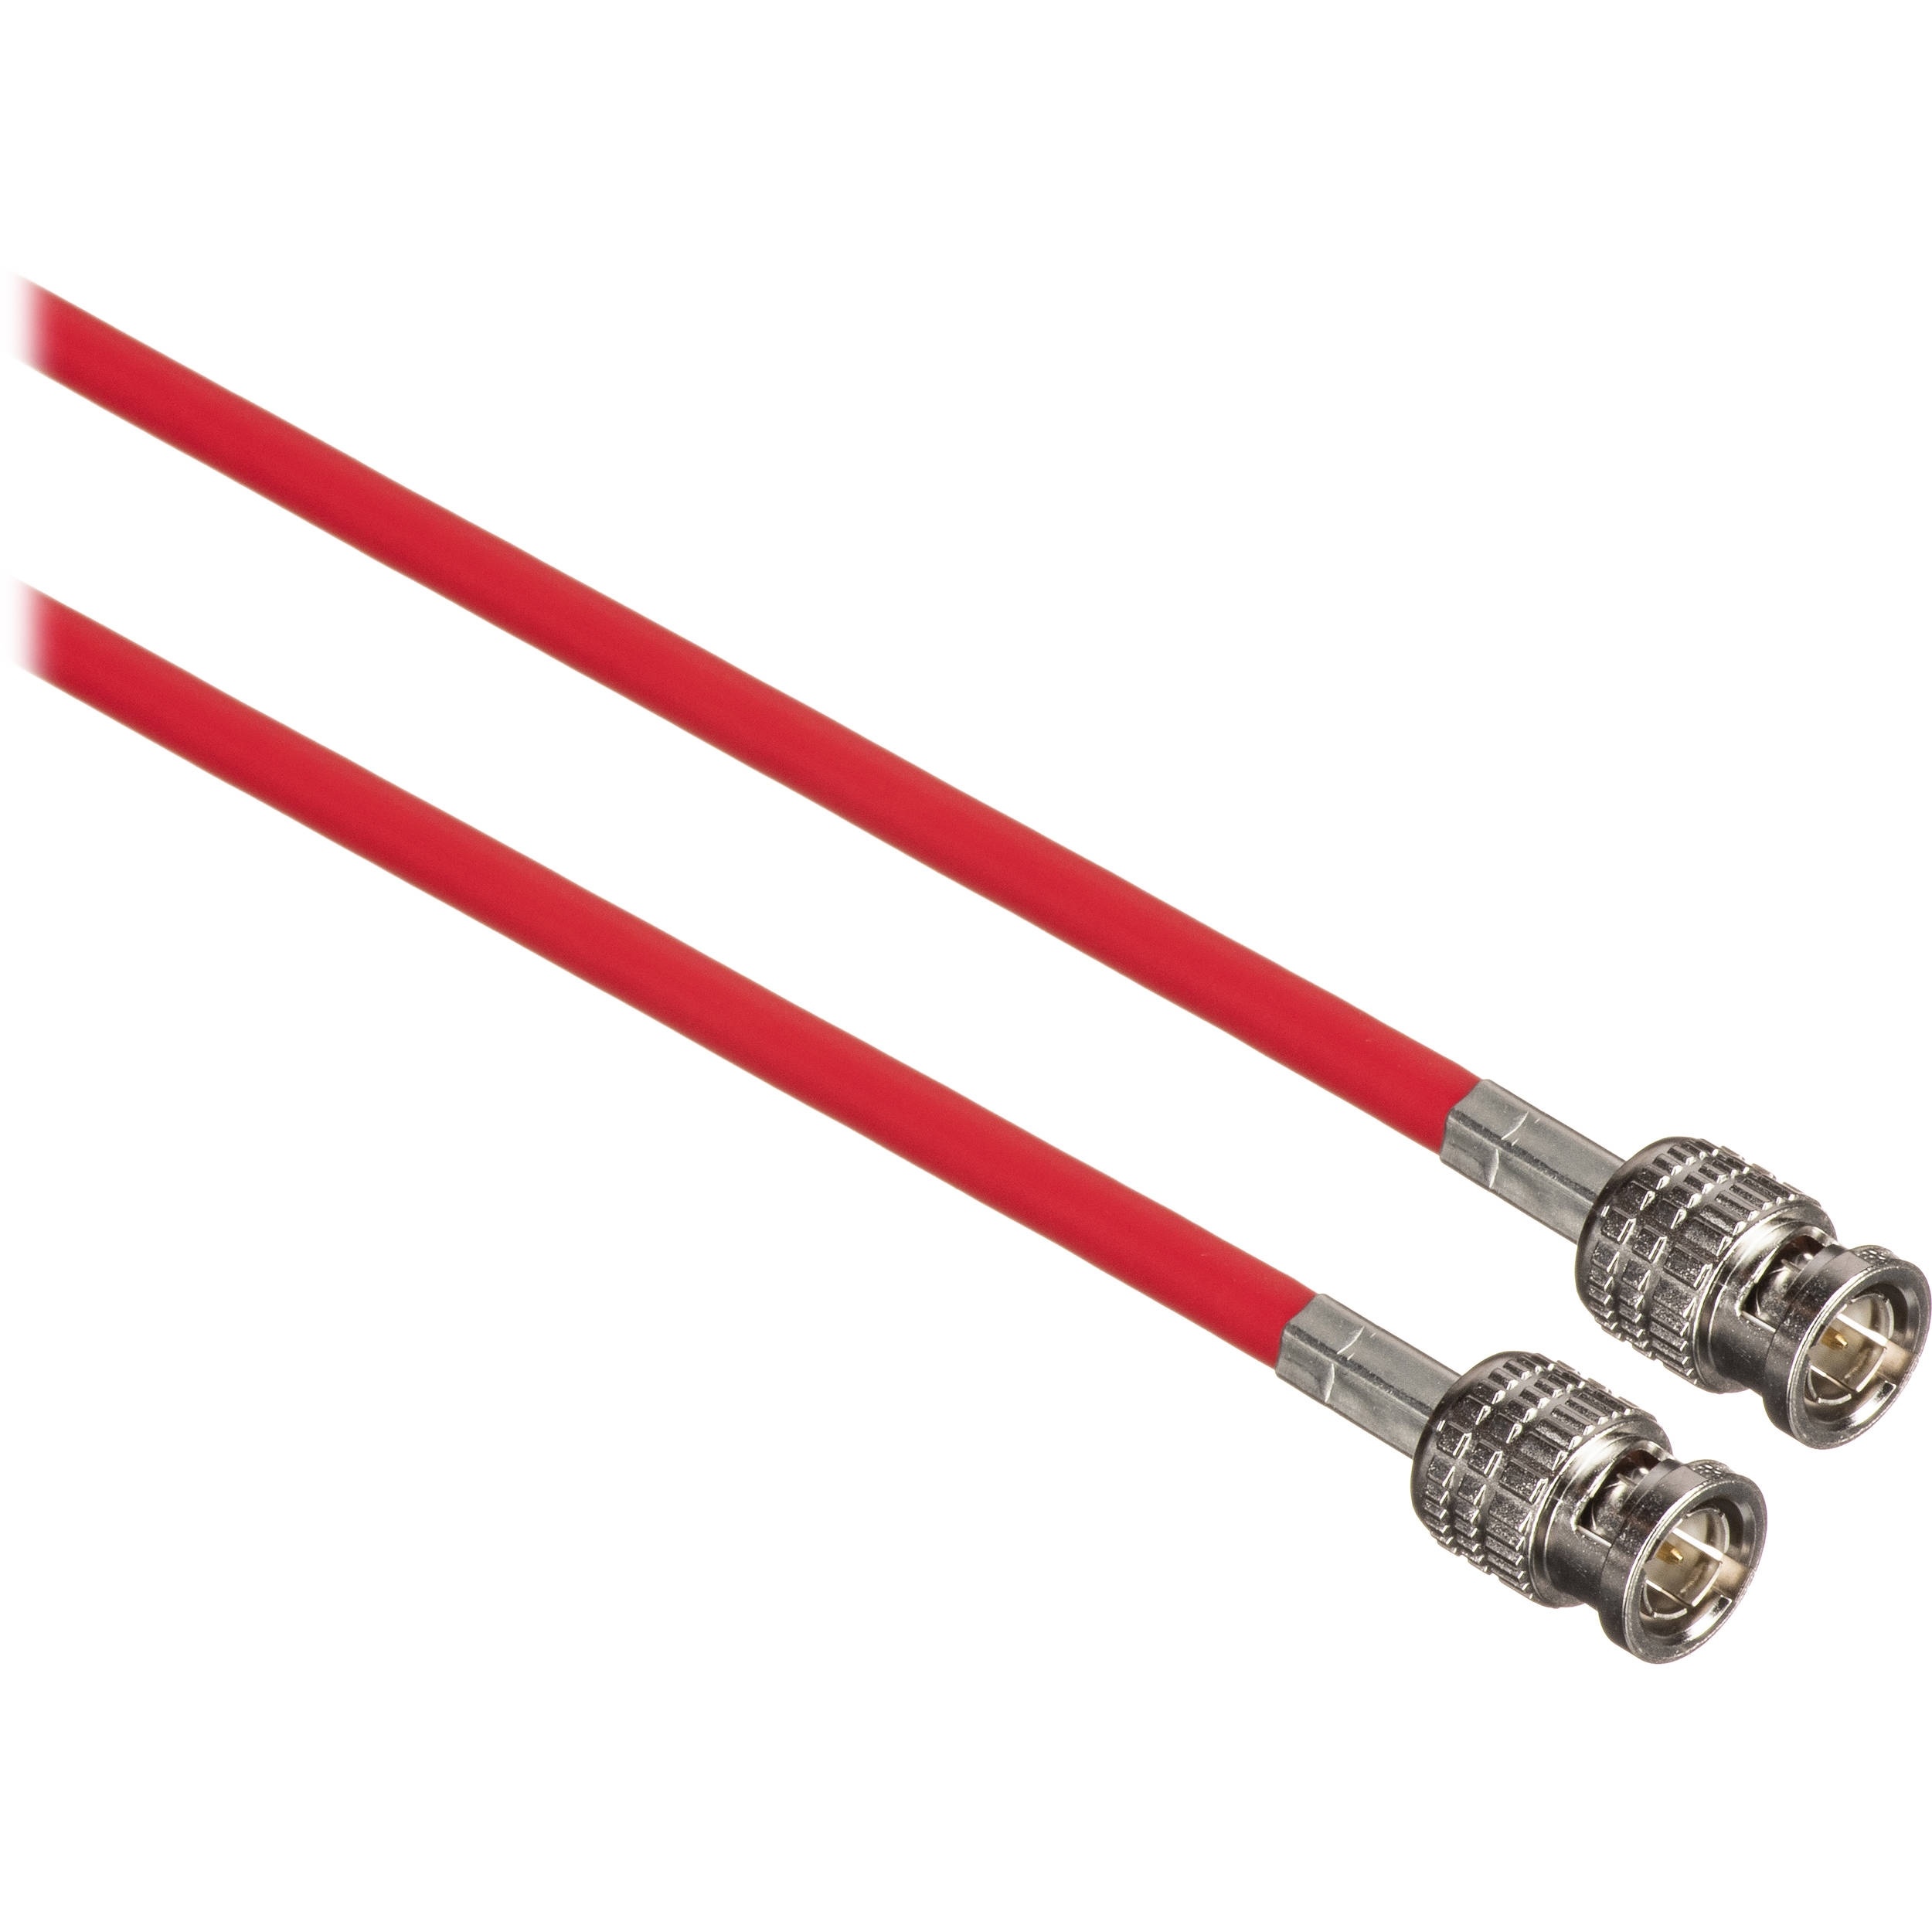 Canare 50 ft HD-SDI Video Coaxial Cable (Red)